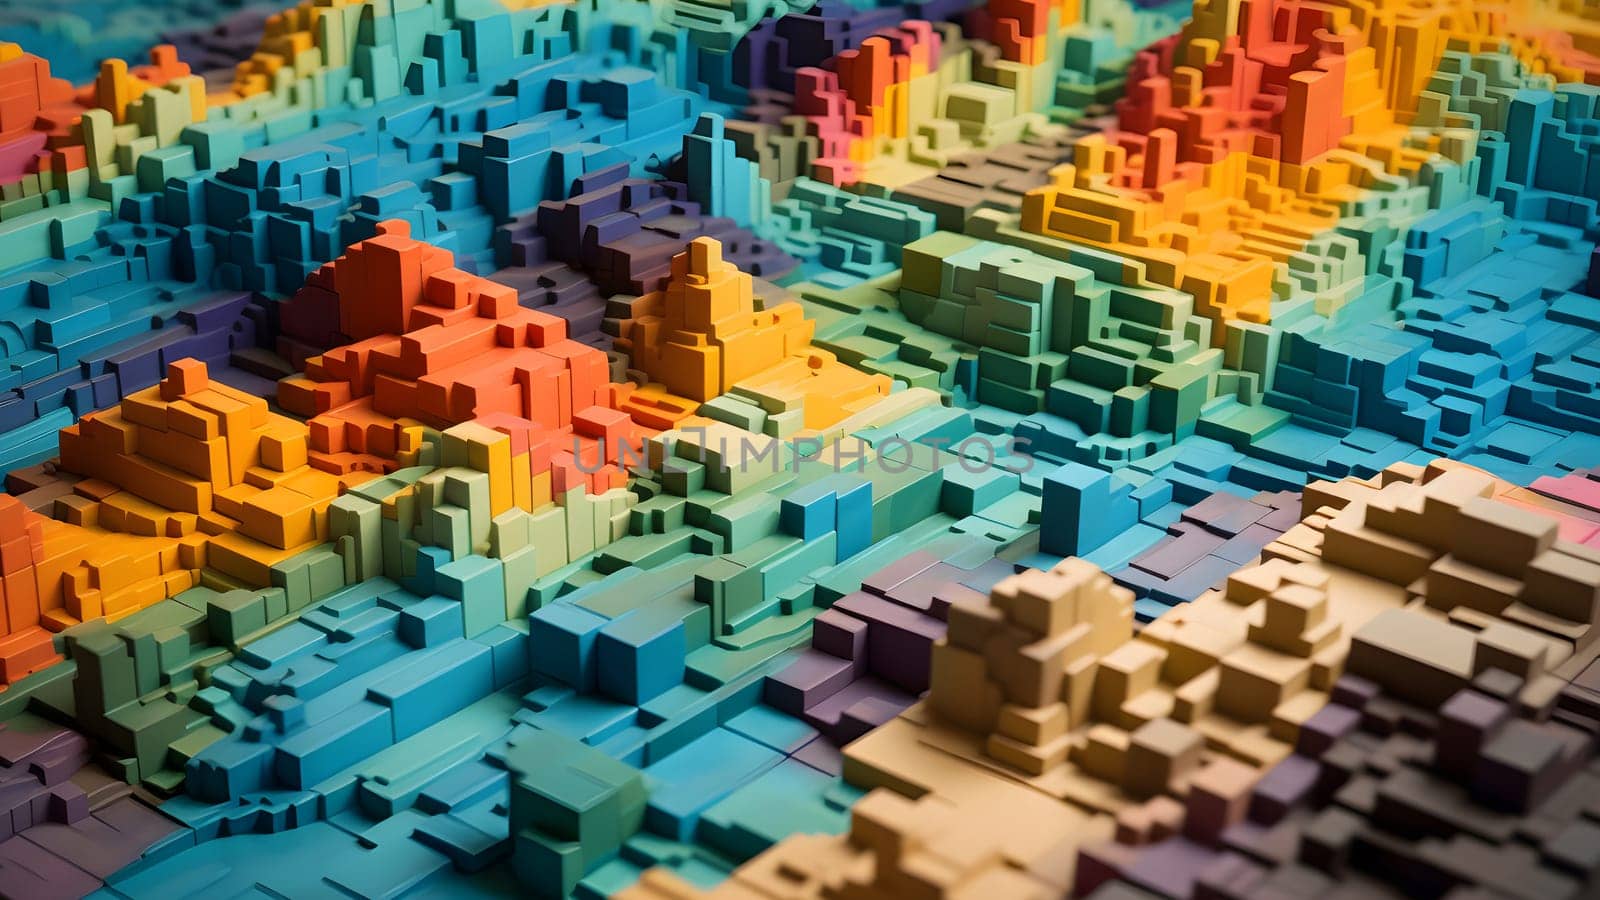 abstract full-frame topographic landscape model based on small colorful cubes. Neural network generated in May 2023. Not based on any actual person, scene or pattern.